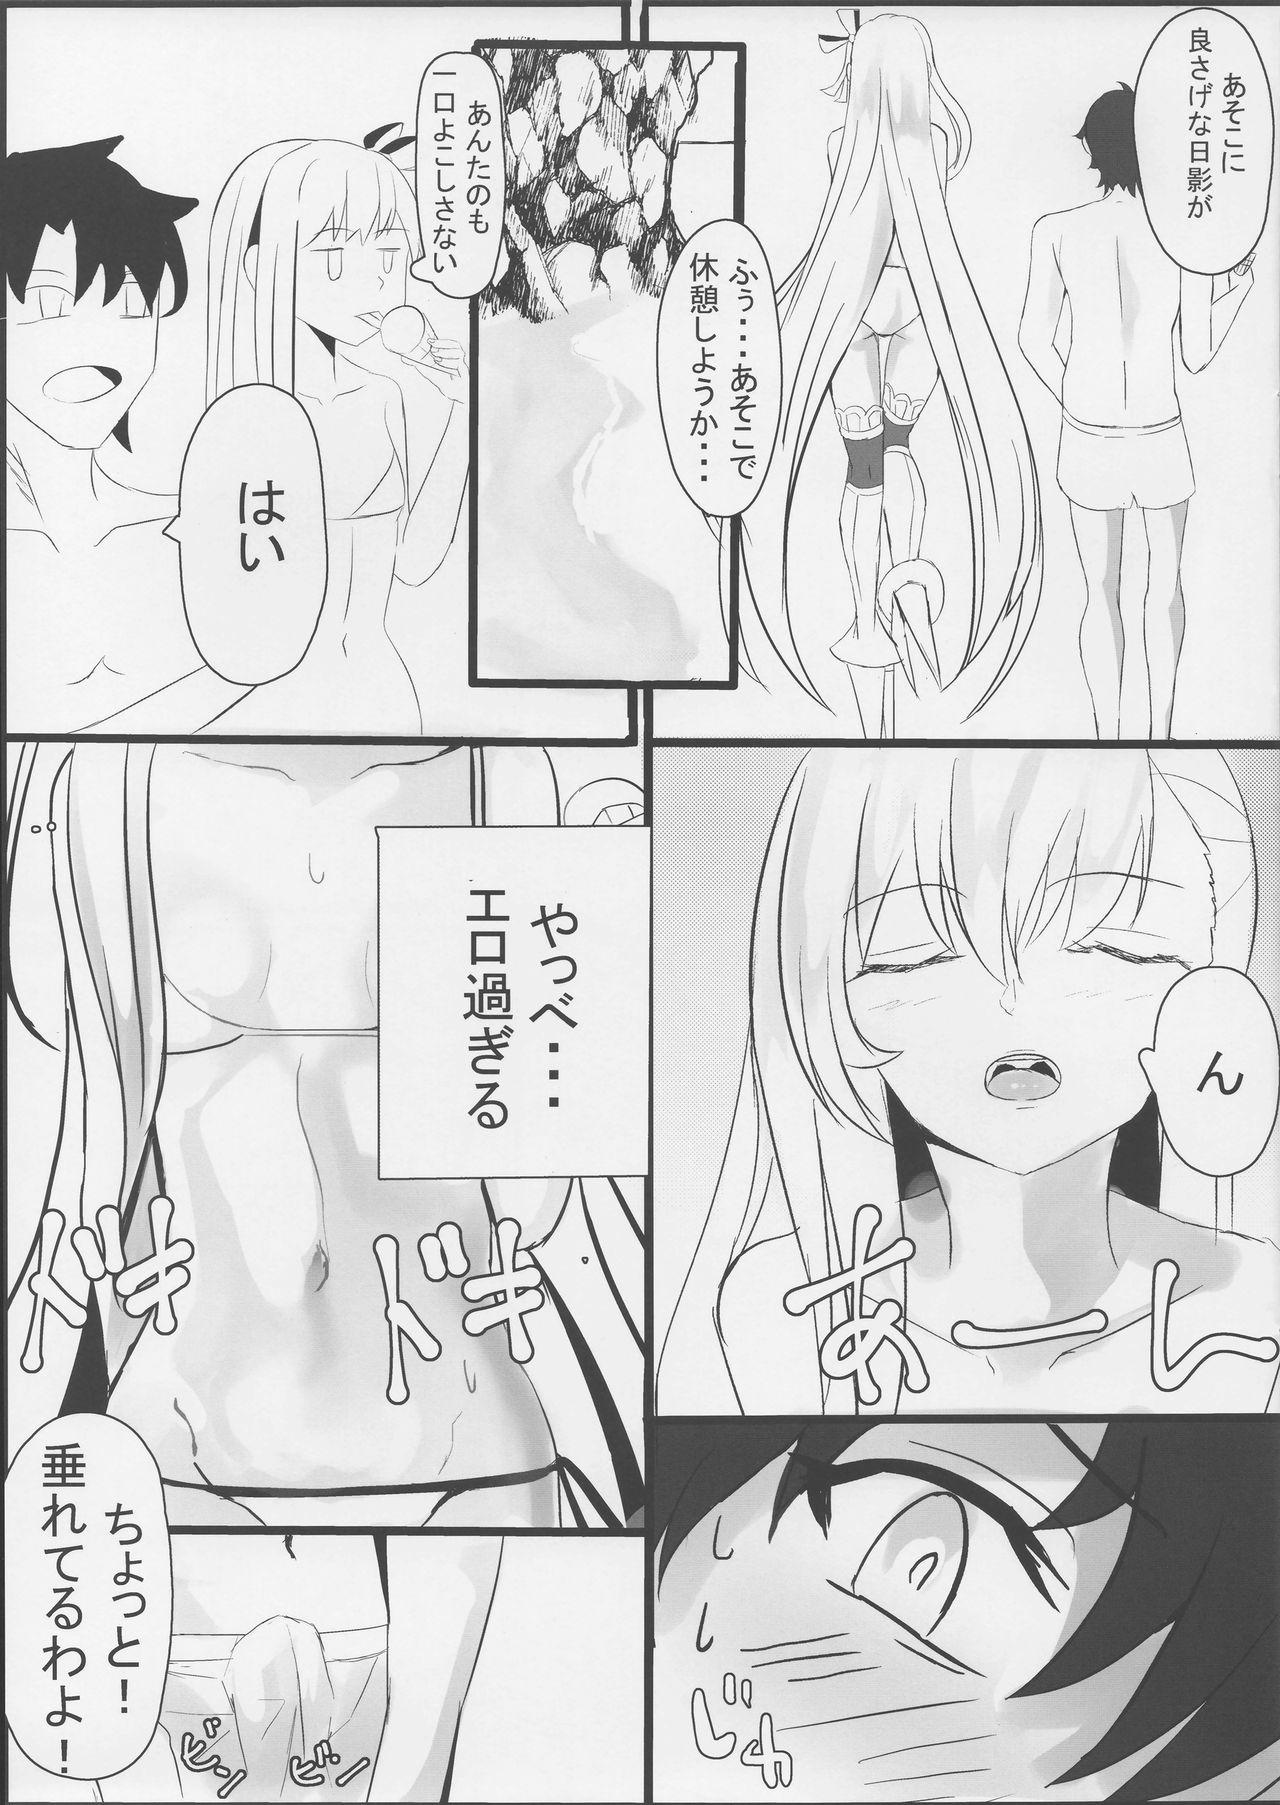 Extreme Melt down 2 - Fate grand order Grande - Page 6